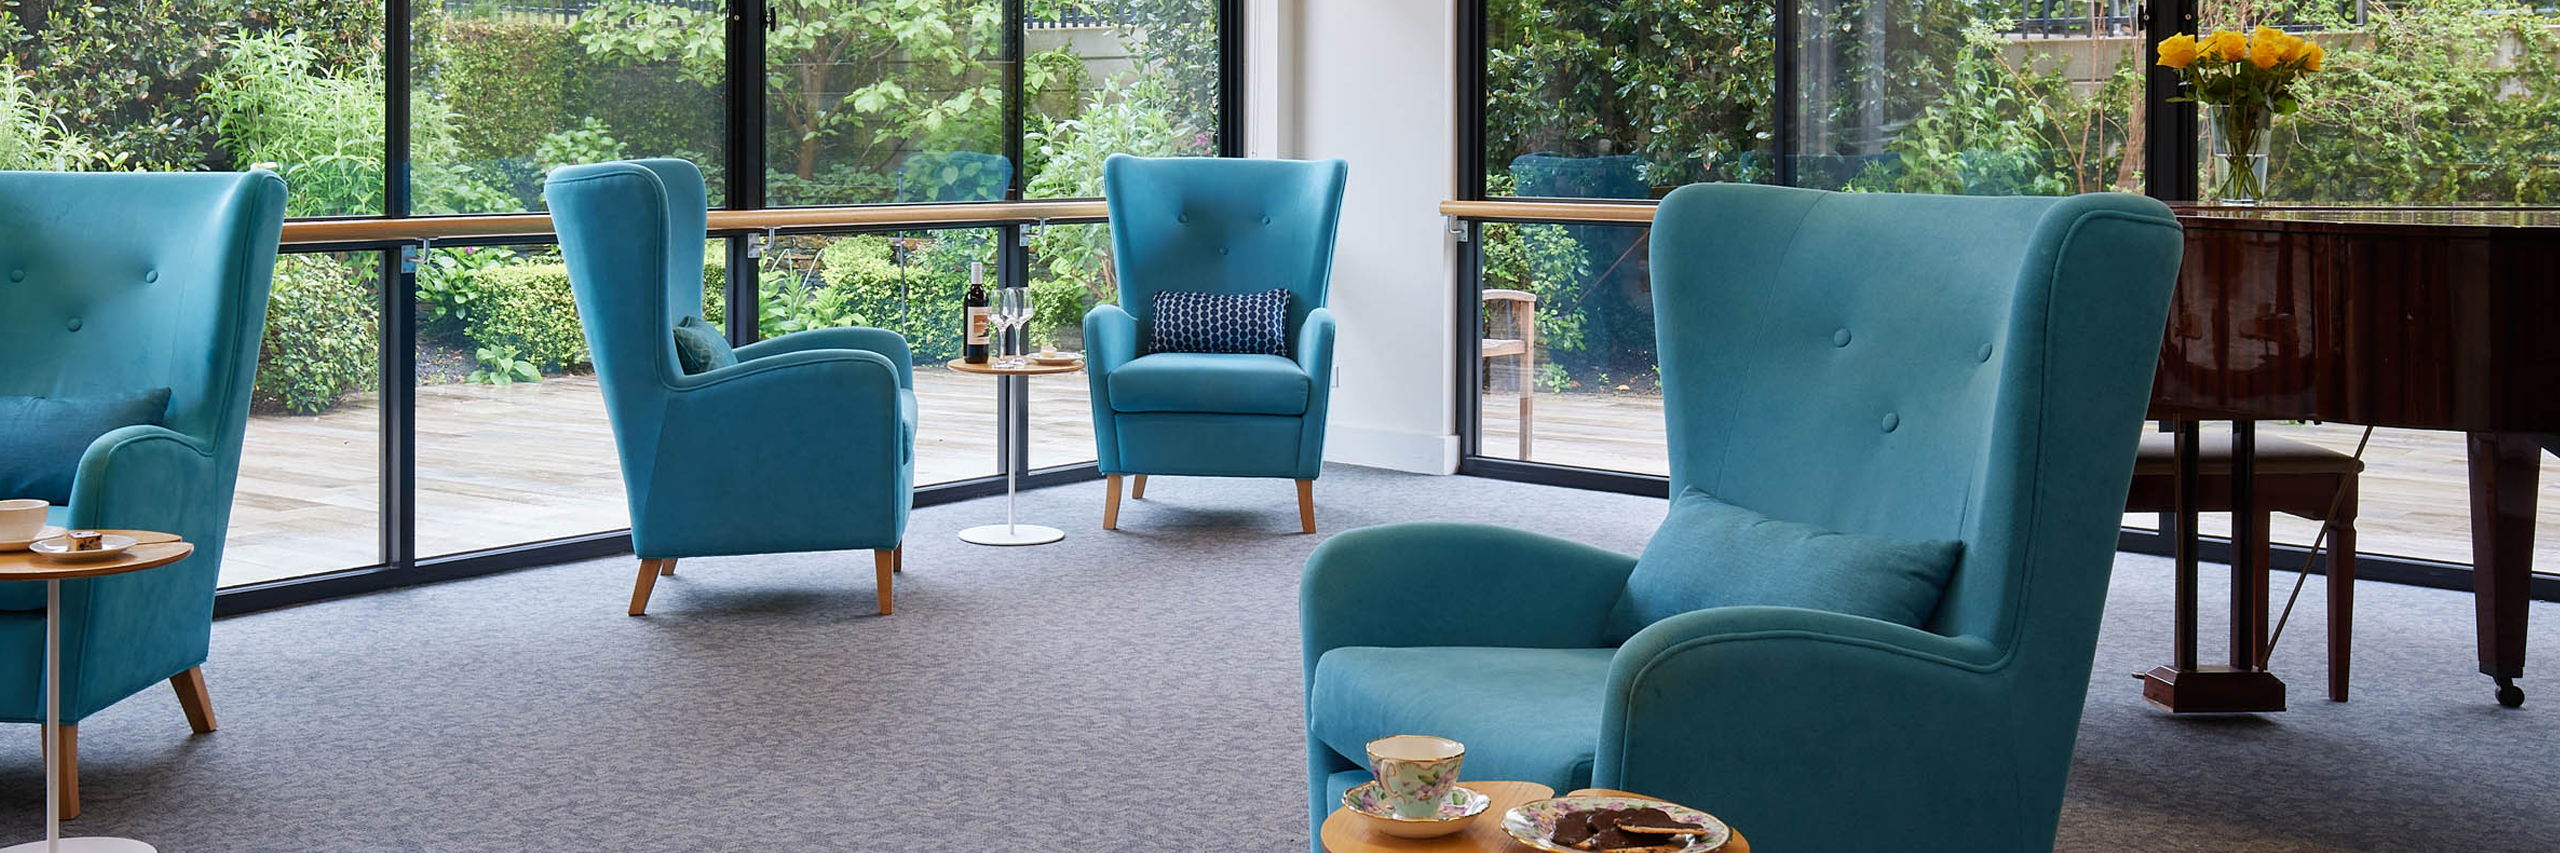 Shared sitting room detail with large comfortable bright blue armchairs and large windows in background.